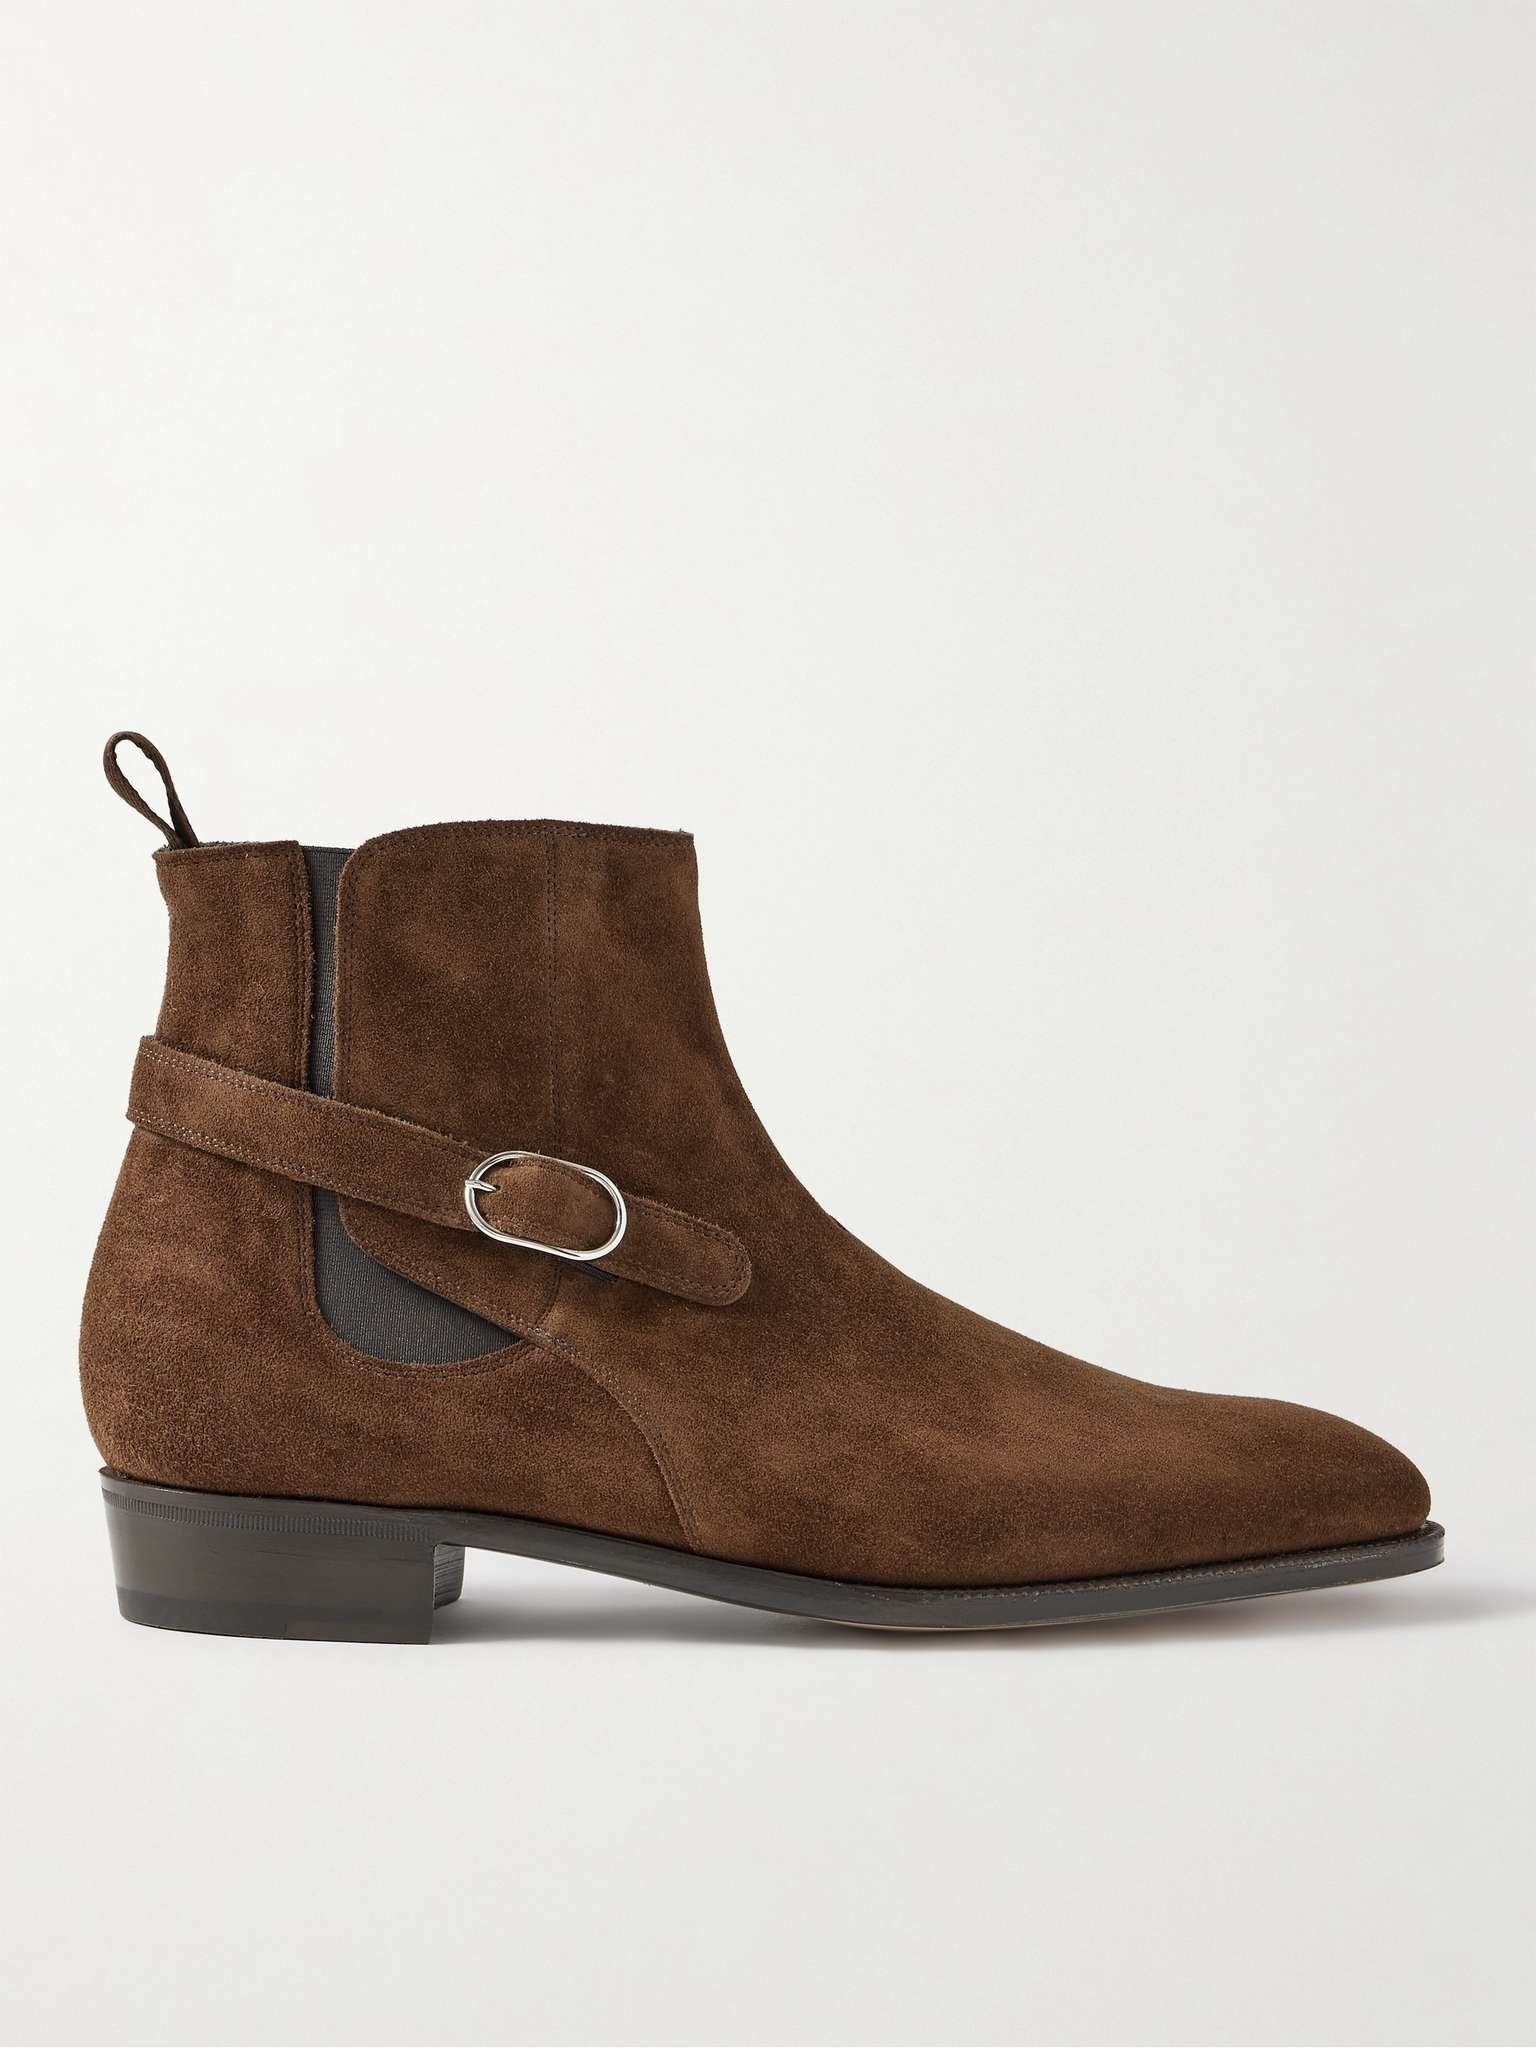 Masons Buckled Suede Chelsea Boots - 1